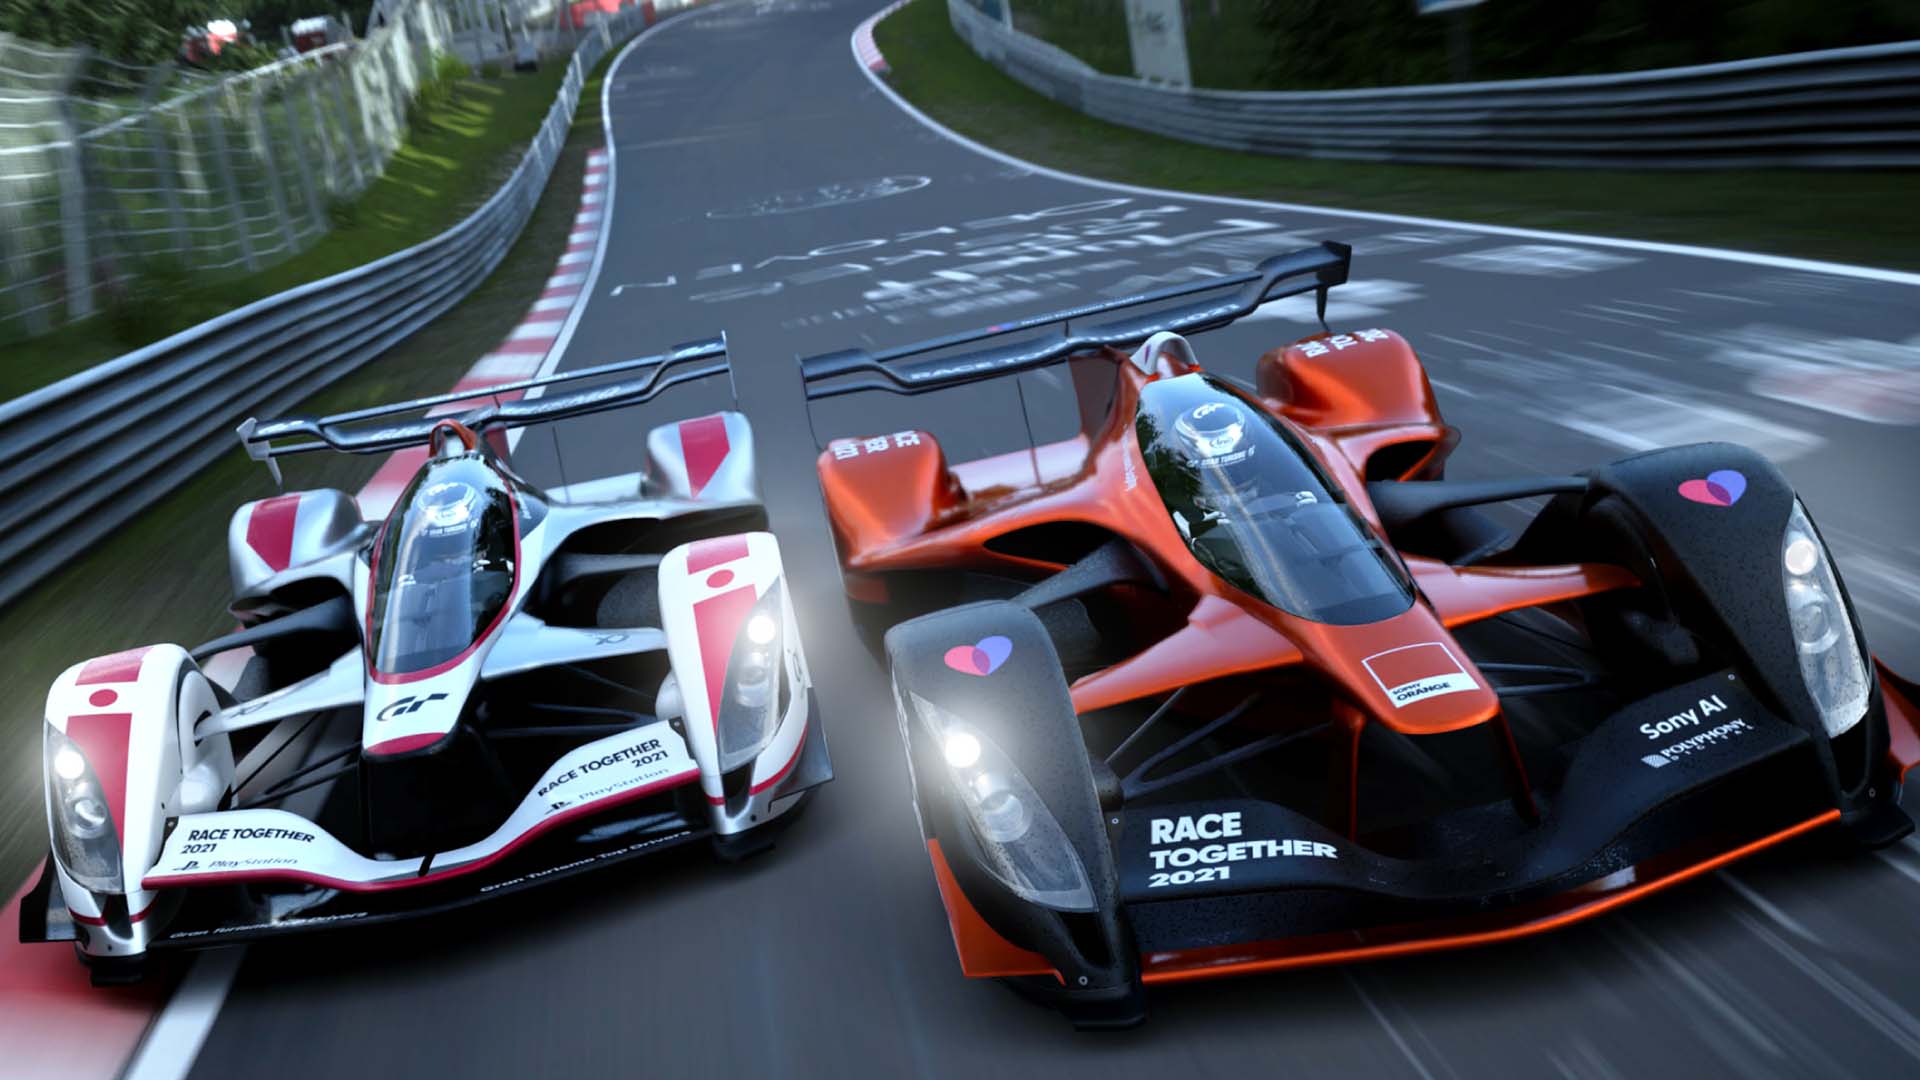 Video: Gran Turismo 7 revealed for PlayStation 5 - Motor Sport